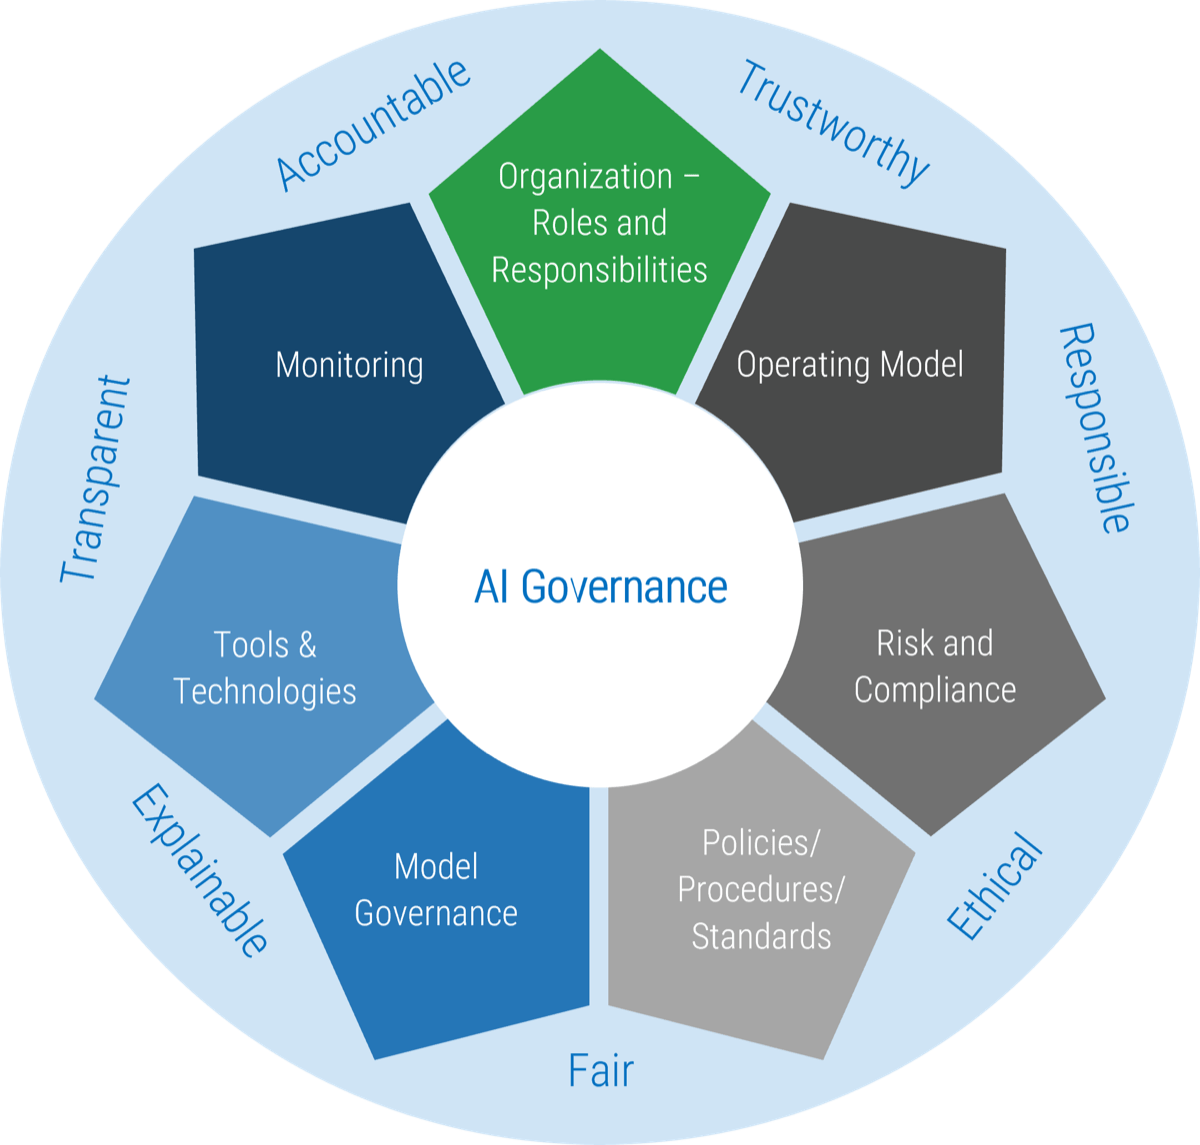 AI Governance Framework with the surrounding 7 headlines and an adjective between each pair: 'Accountable', 'Trustworthy', 'Responsible', 'Ethical', 'Fair', 'Explainable', 'Transparent'.